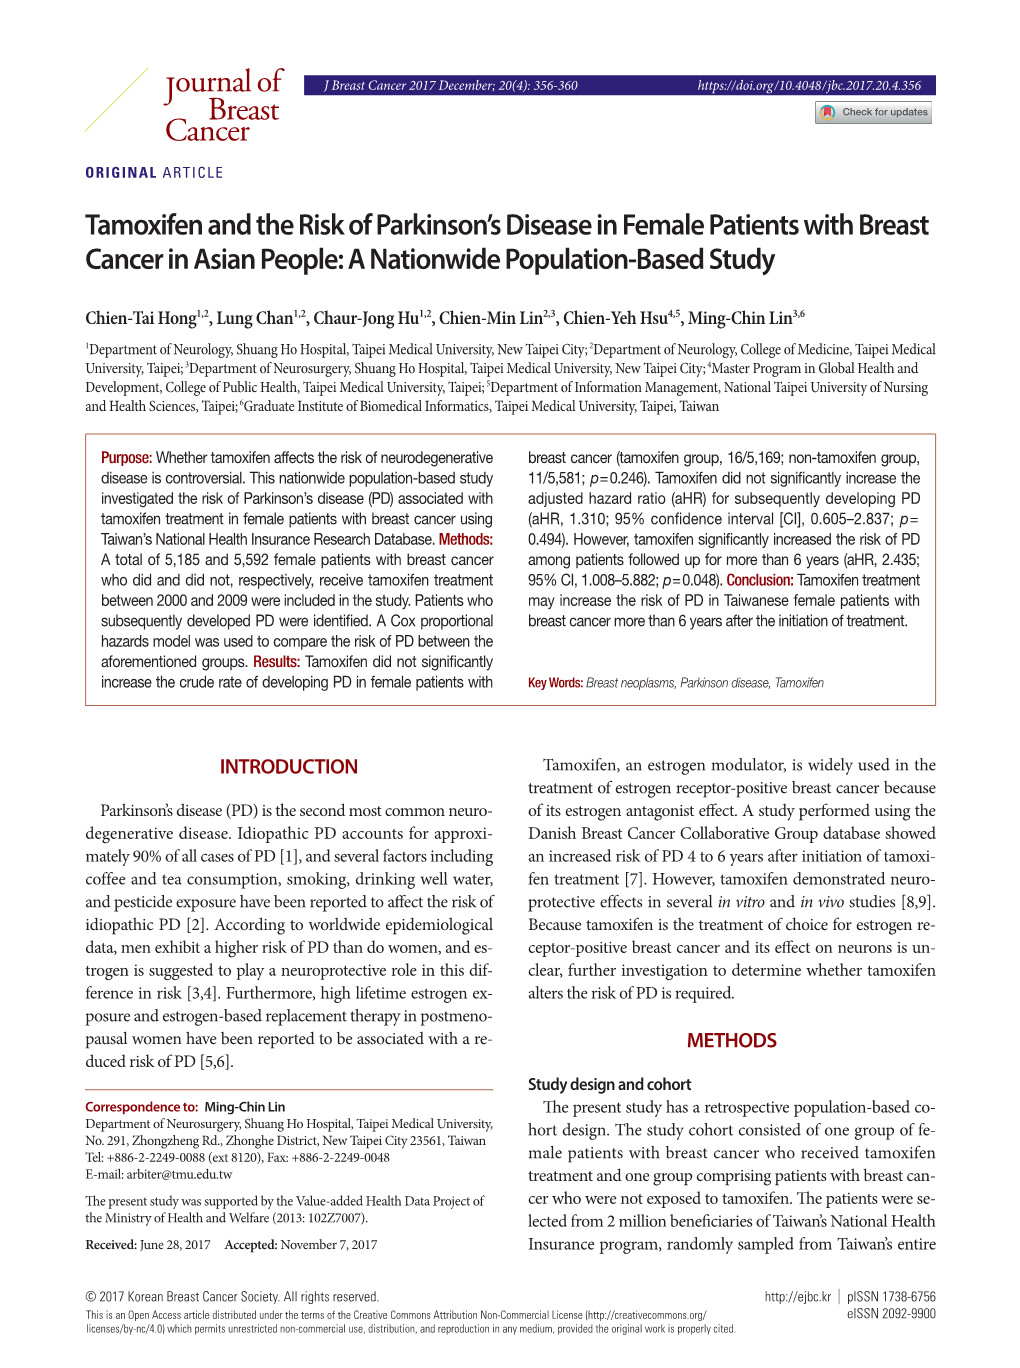 Tamoxifen and the Risk of Parkinson's Disease in Female Patients With